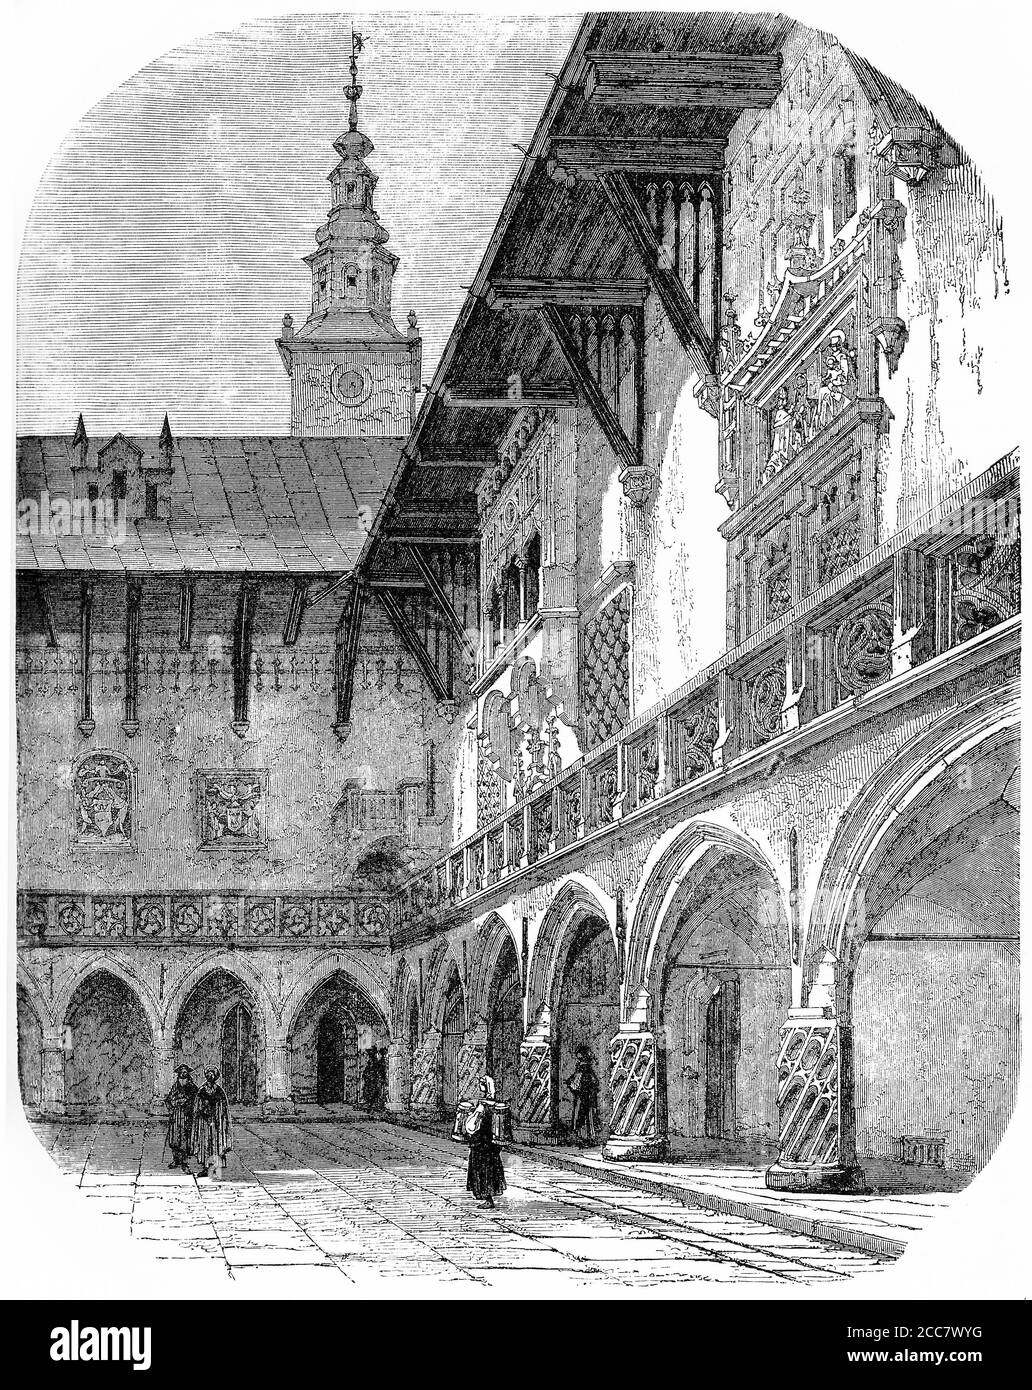 Engraving of a courtyard at the university of Cracow, circa 1570, illustration from 'The history of Protestantism' by James Aitken Wylie (1808-1890), pub. 1878 Stock Photo